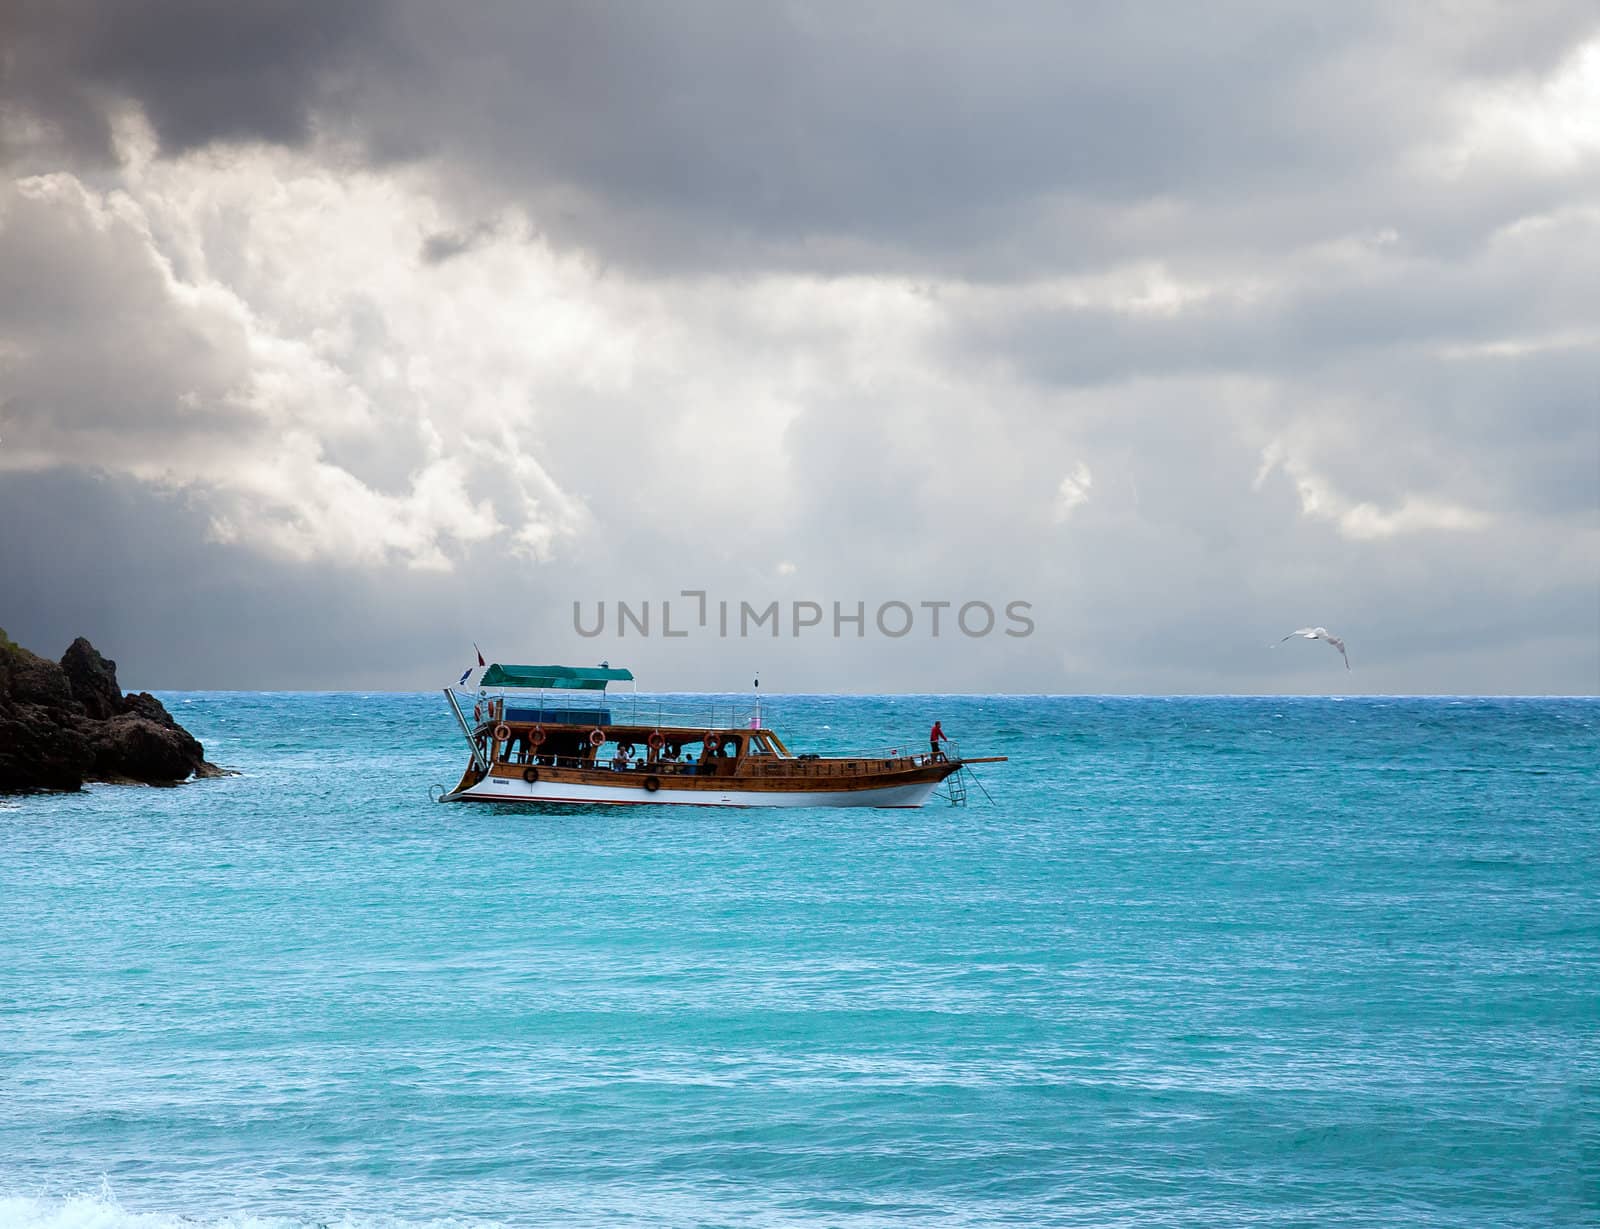 boat in the sea and stormy sky by sfinks